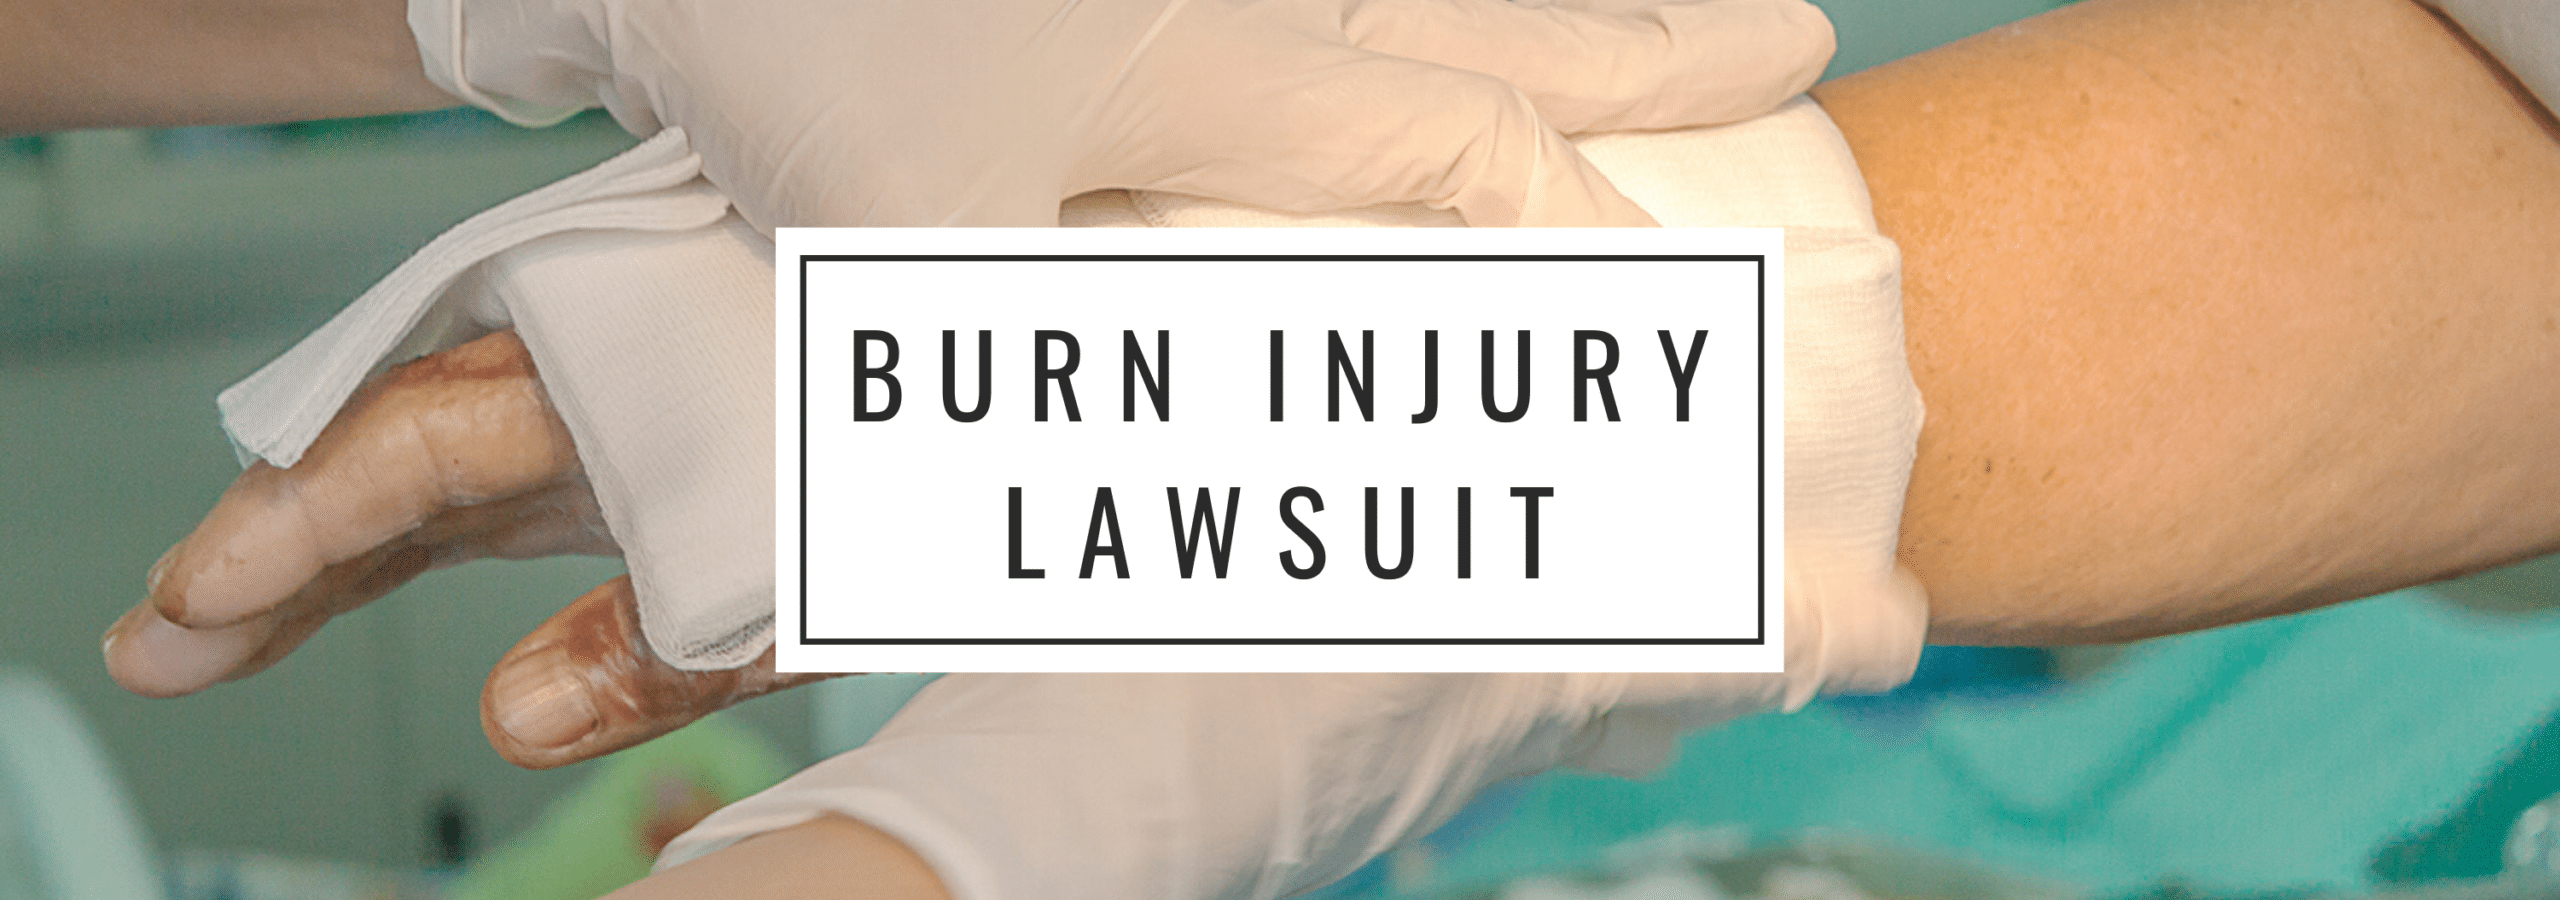 instant pot burn injury accidents